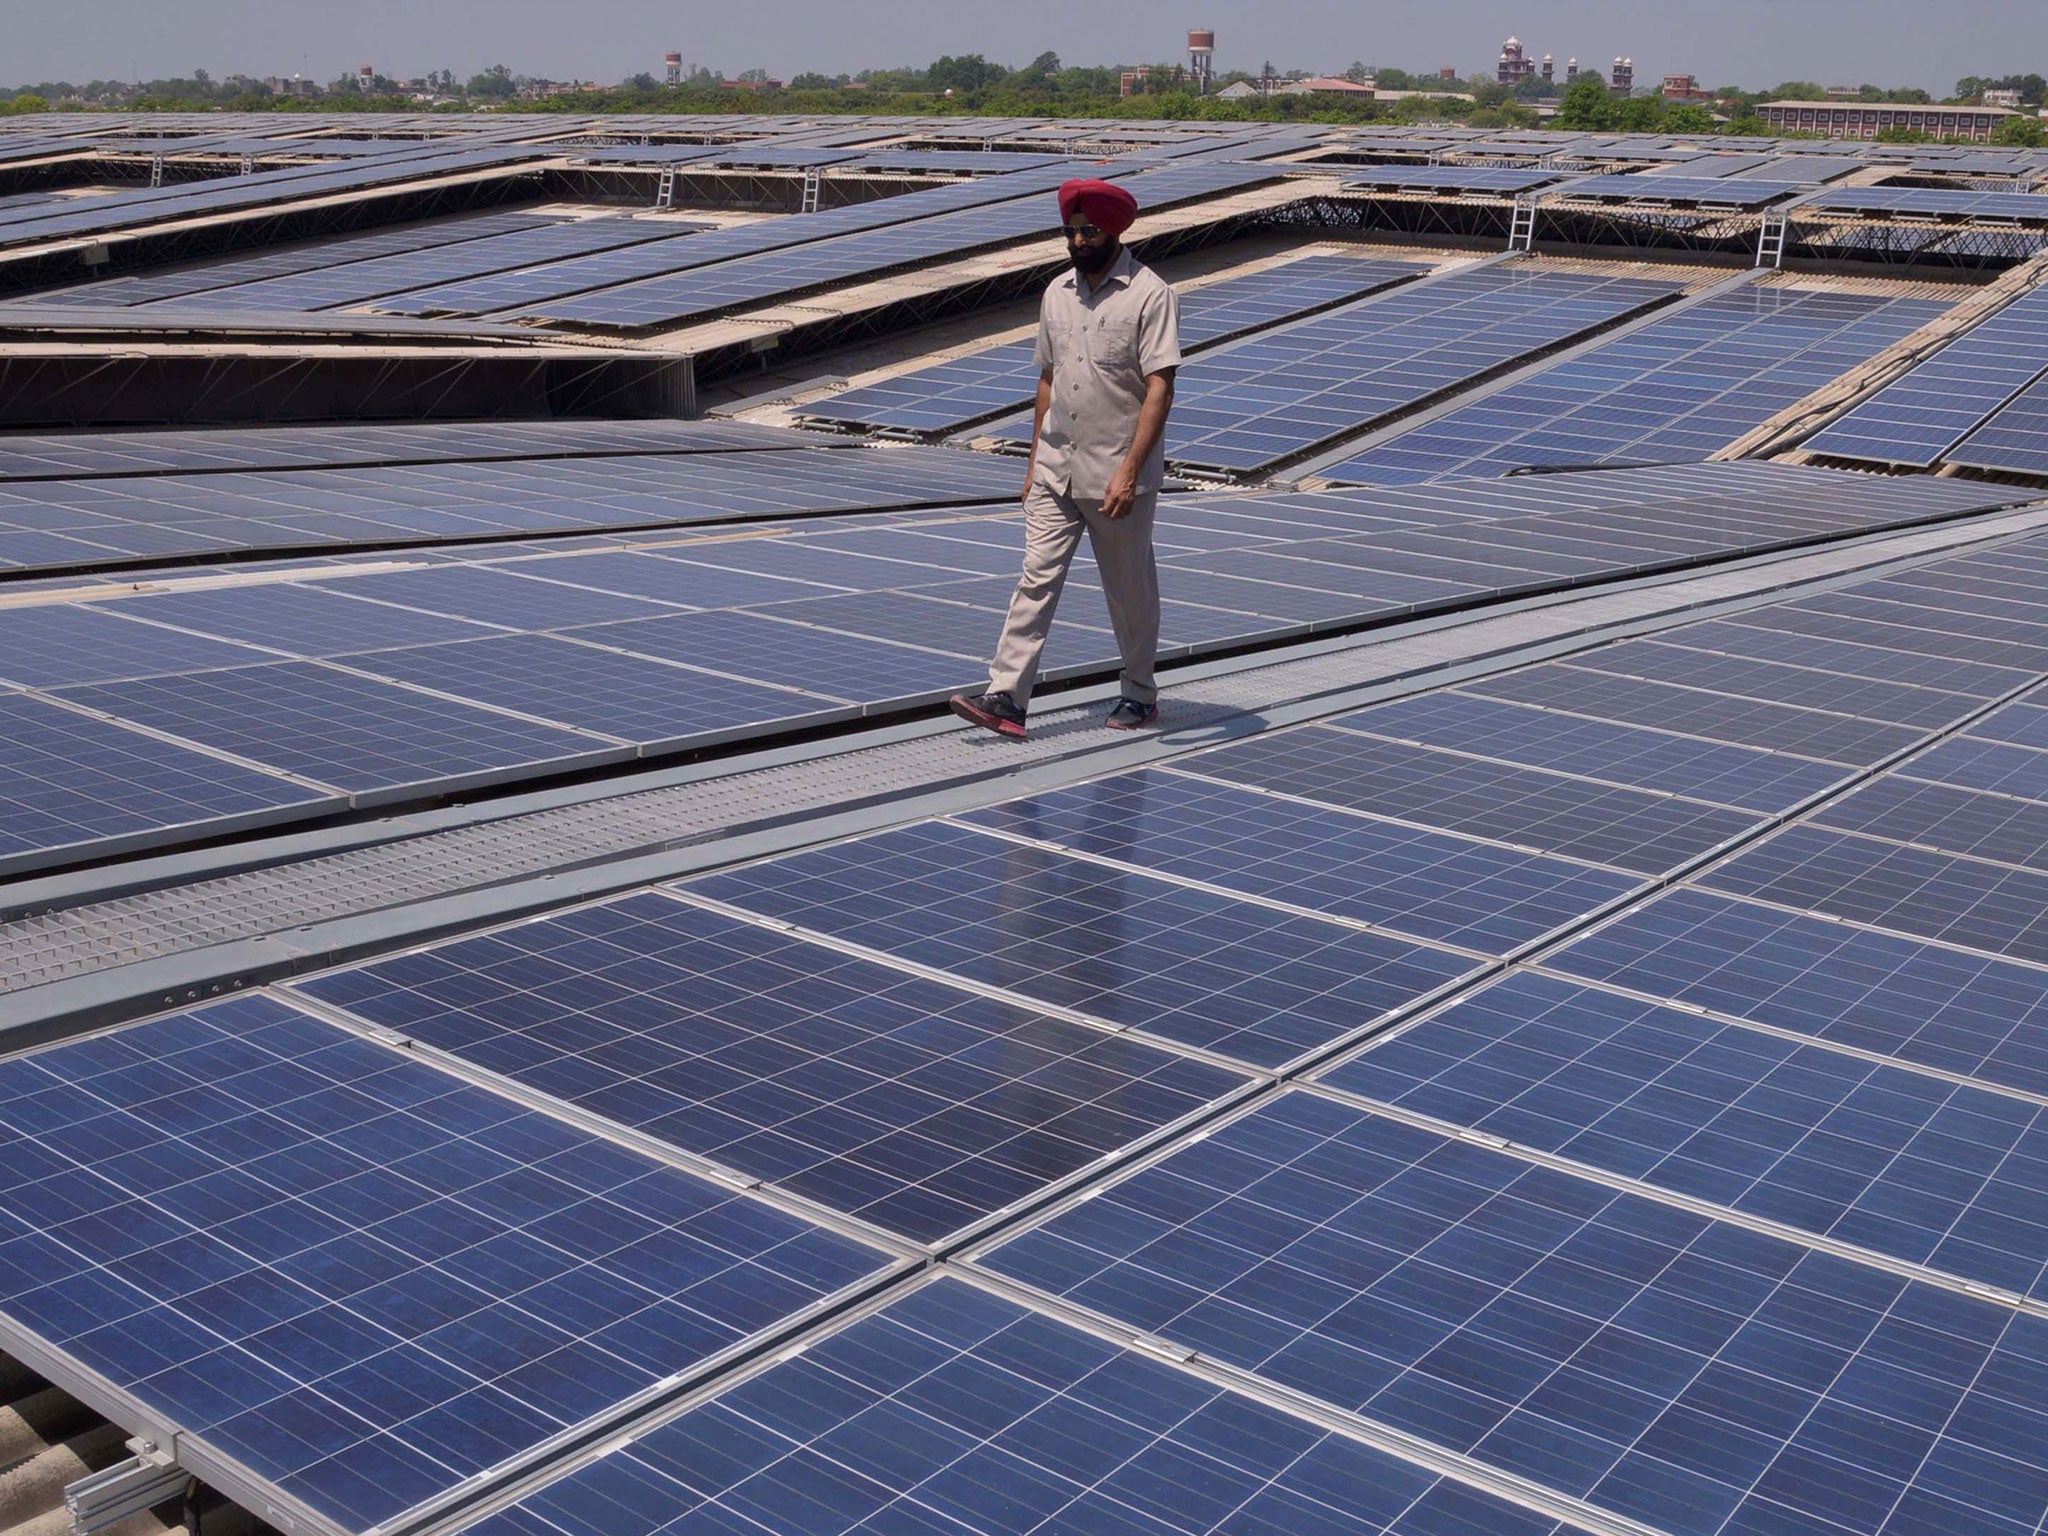 A solar farm near Amritsar in India, which is pushing renewable energy